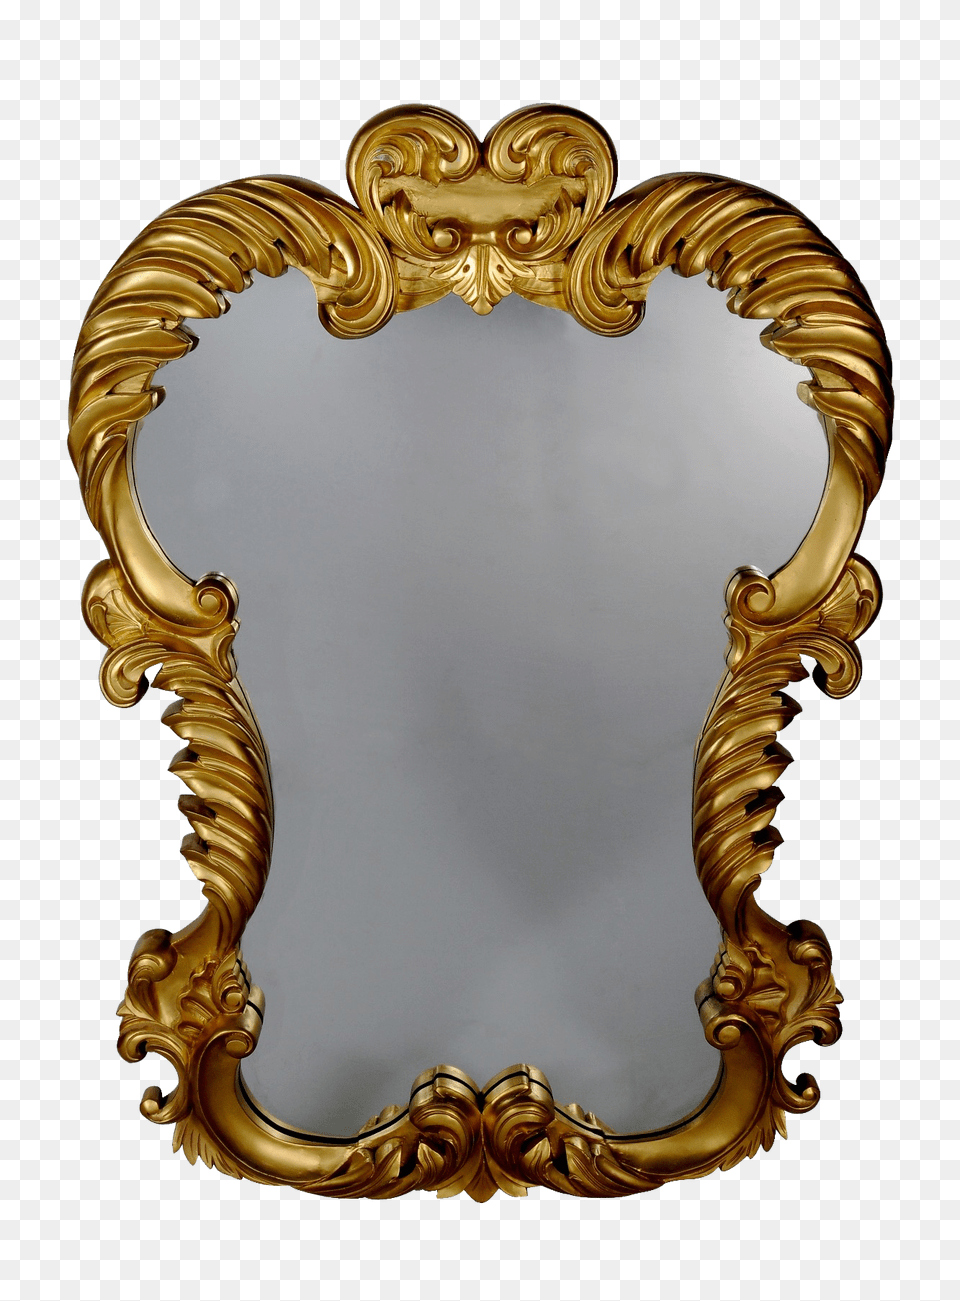 Golden Mirror Frame Transparent Image, Photography, Accessories, Jewelry, Locket Png